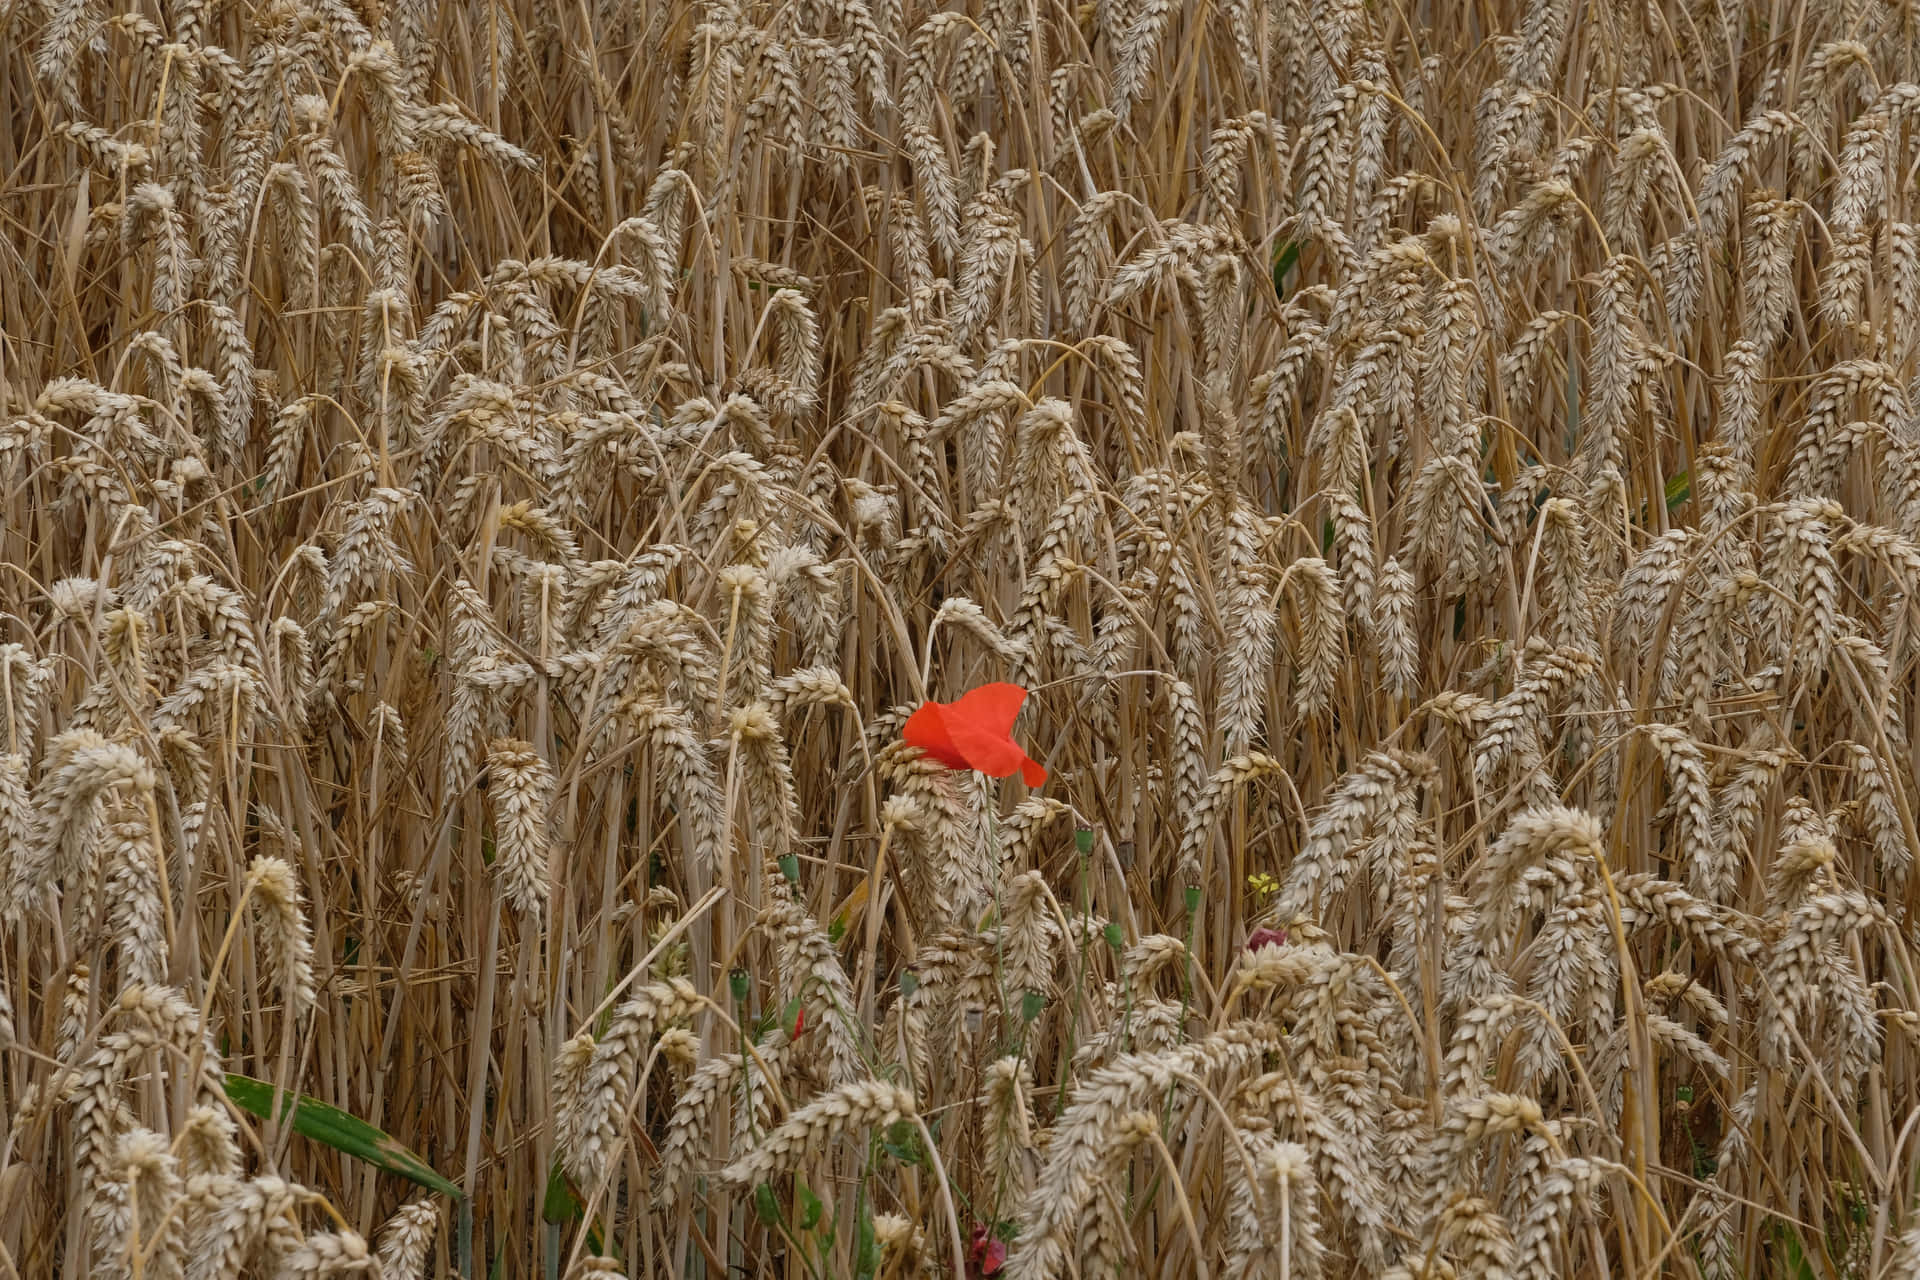 Red Conspicuous Flower In A Wheat Field Wallpaper